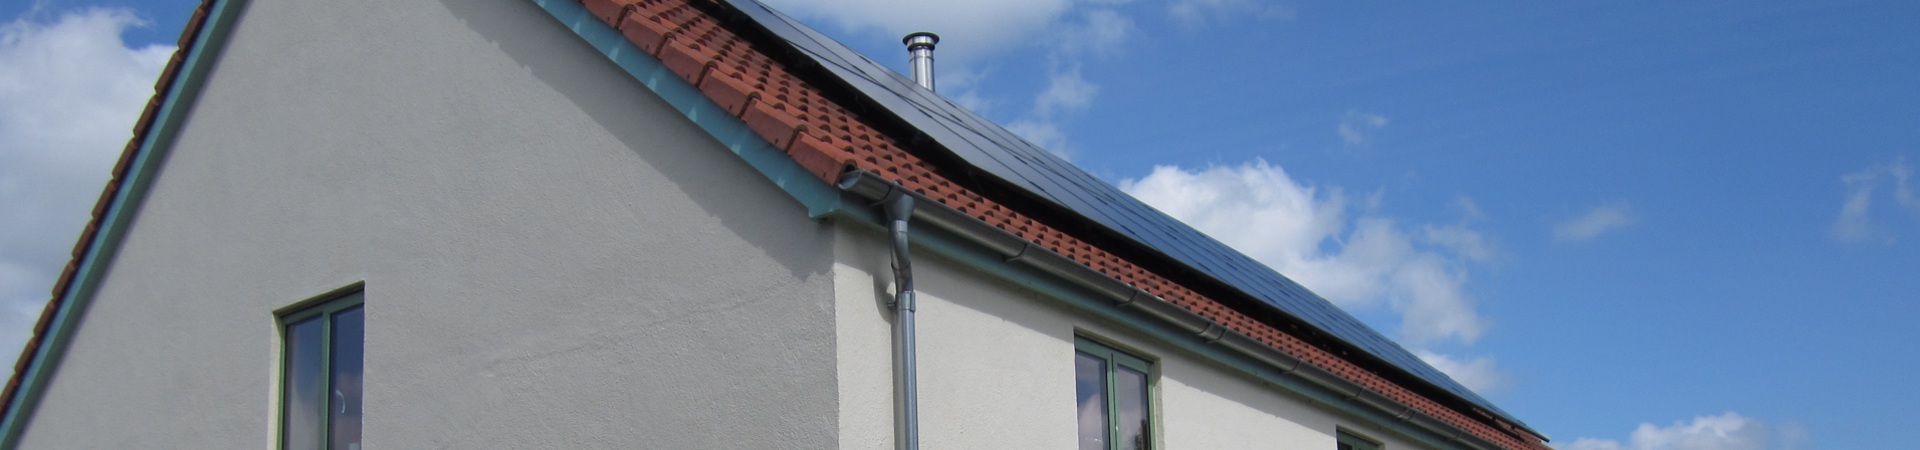 New Builds with Solar PV